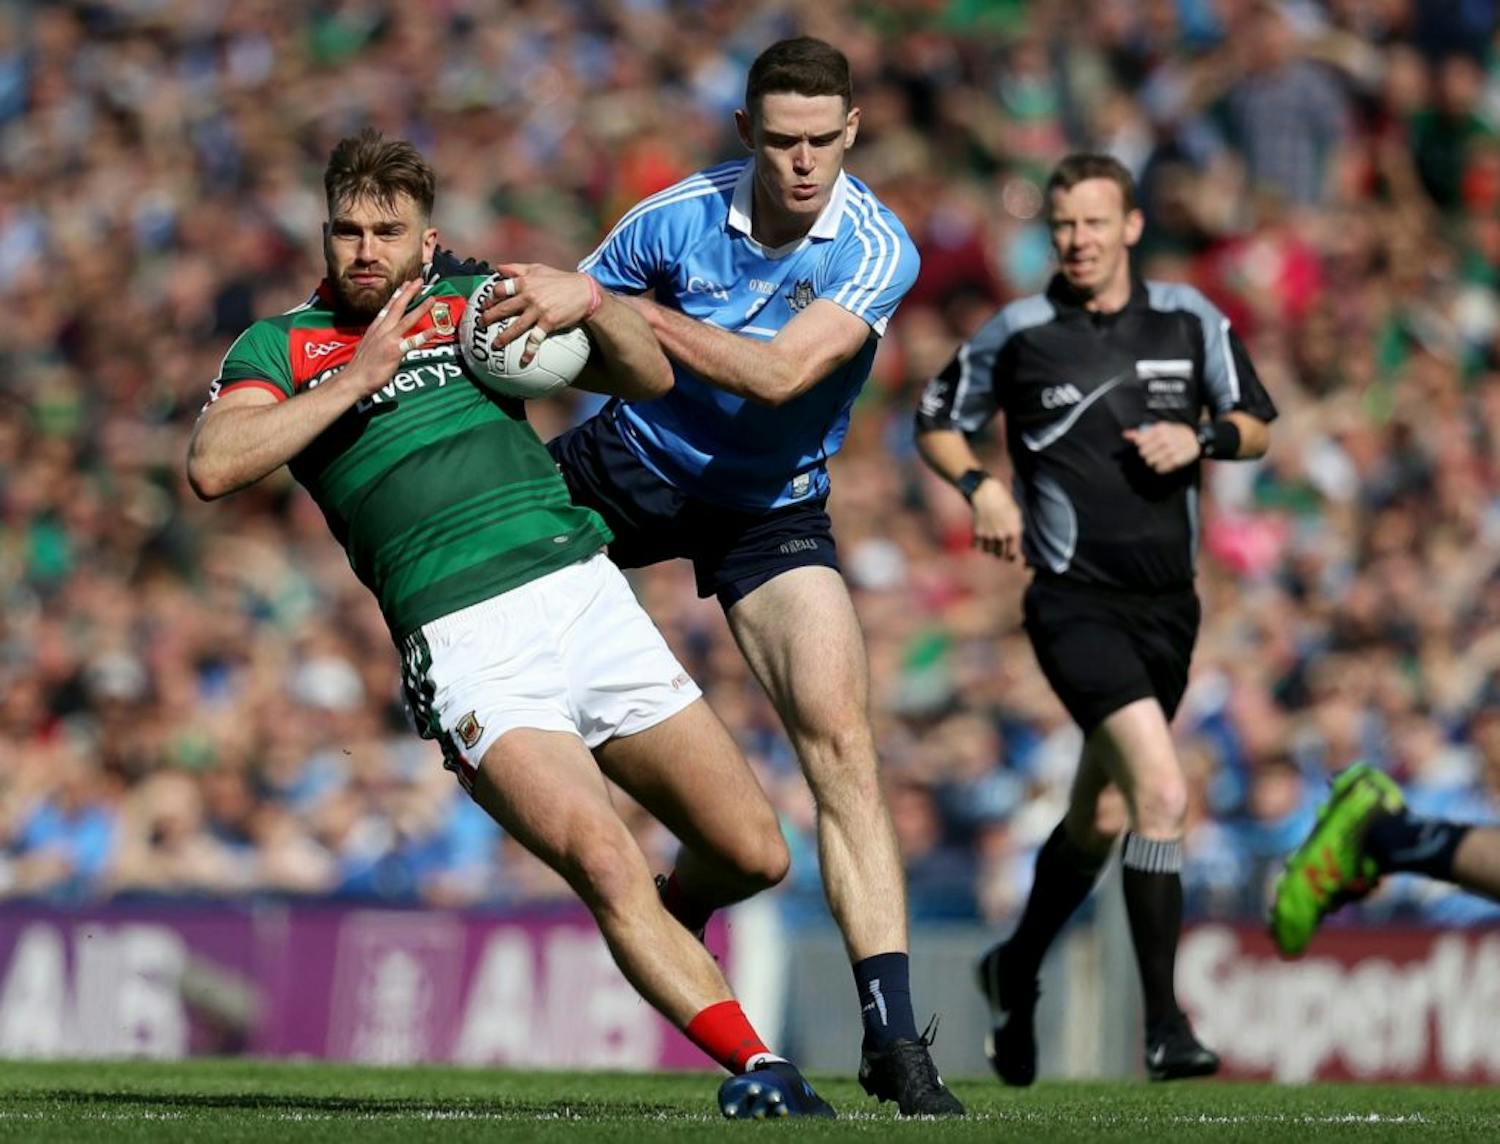 Are Dublin on the ropes?